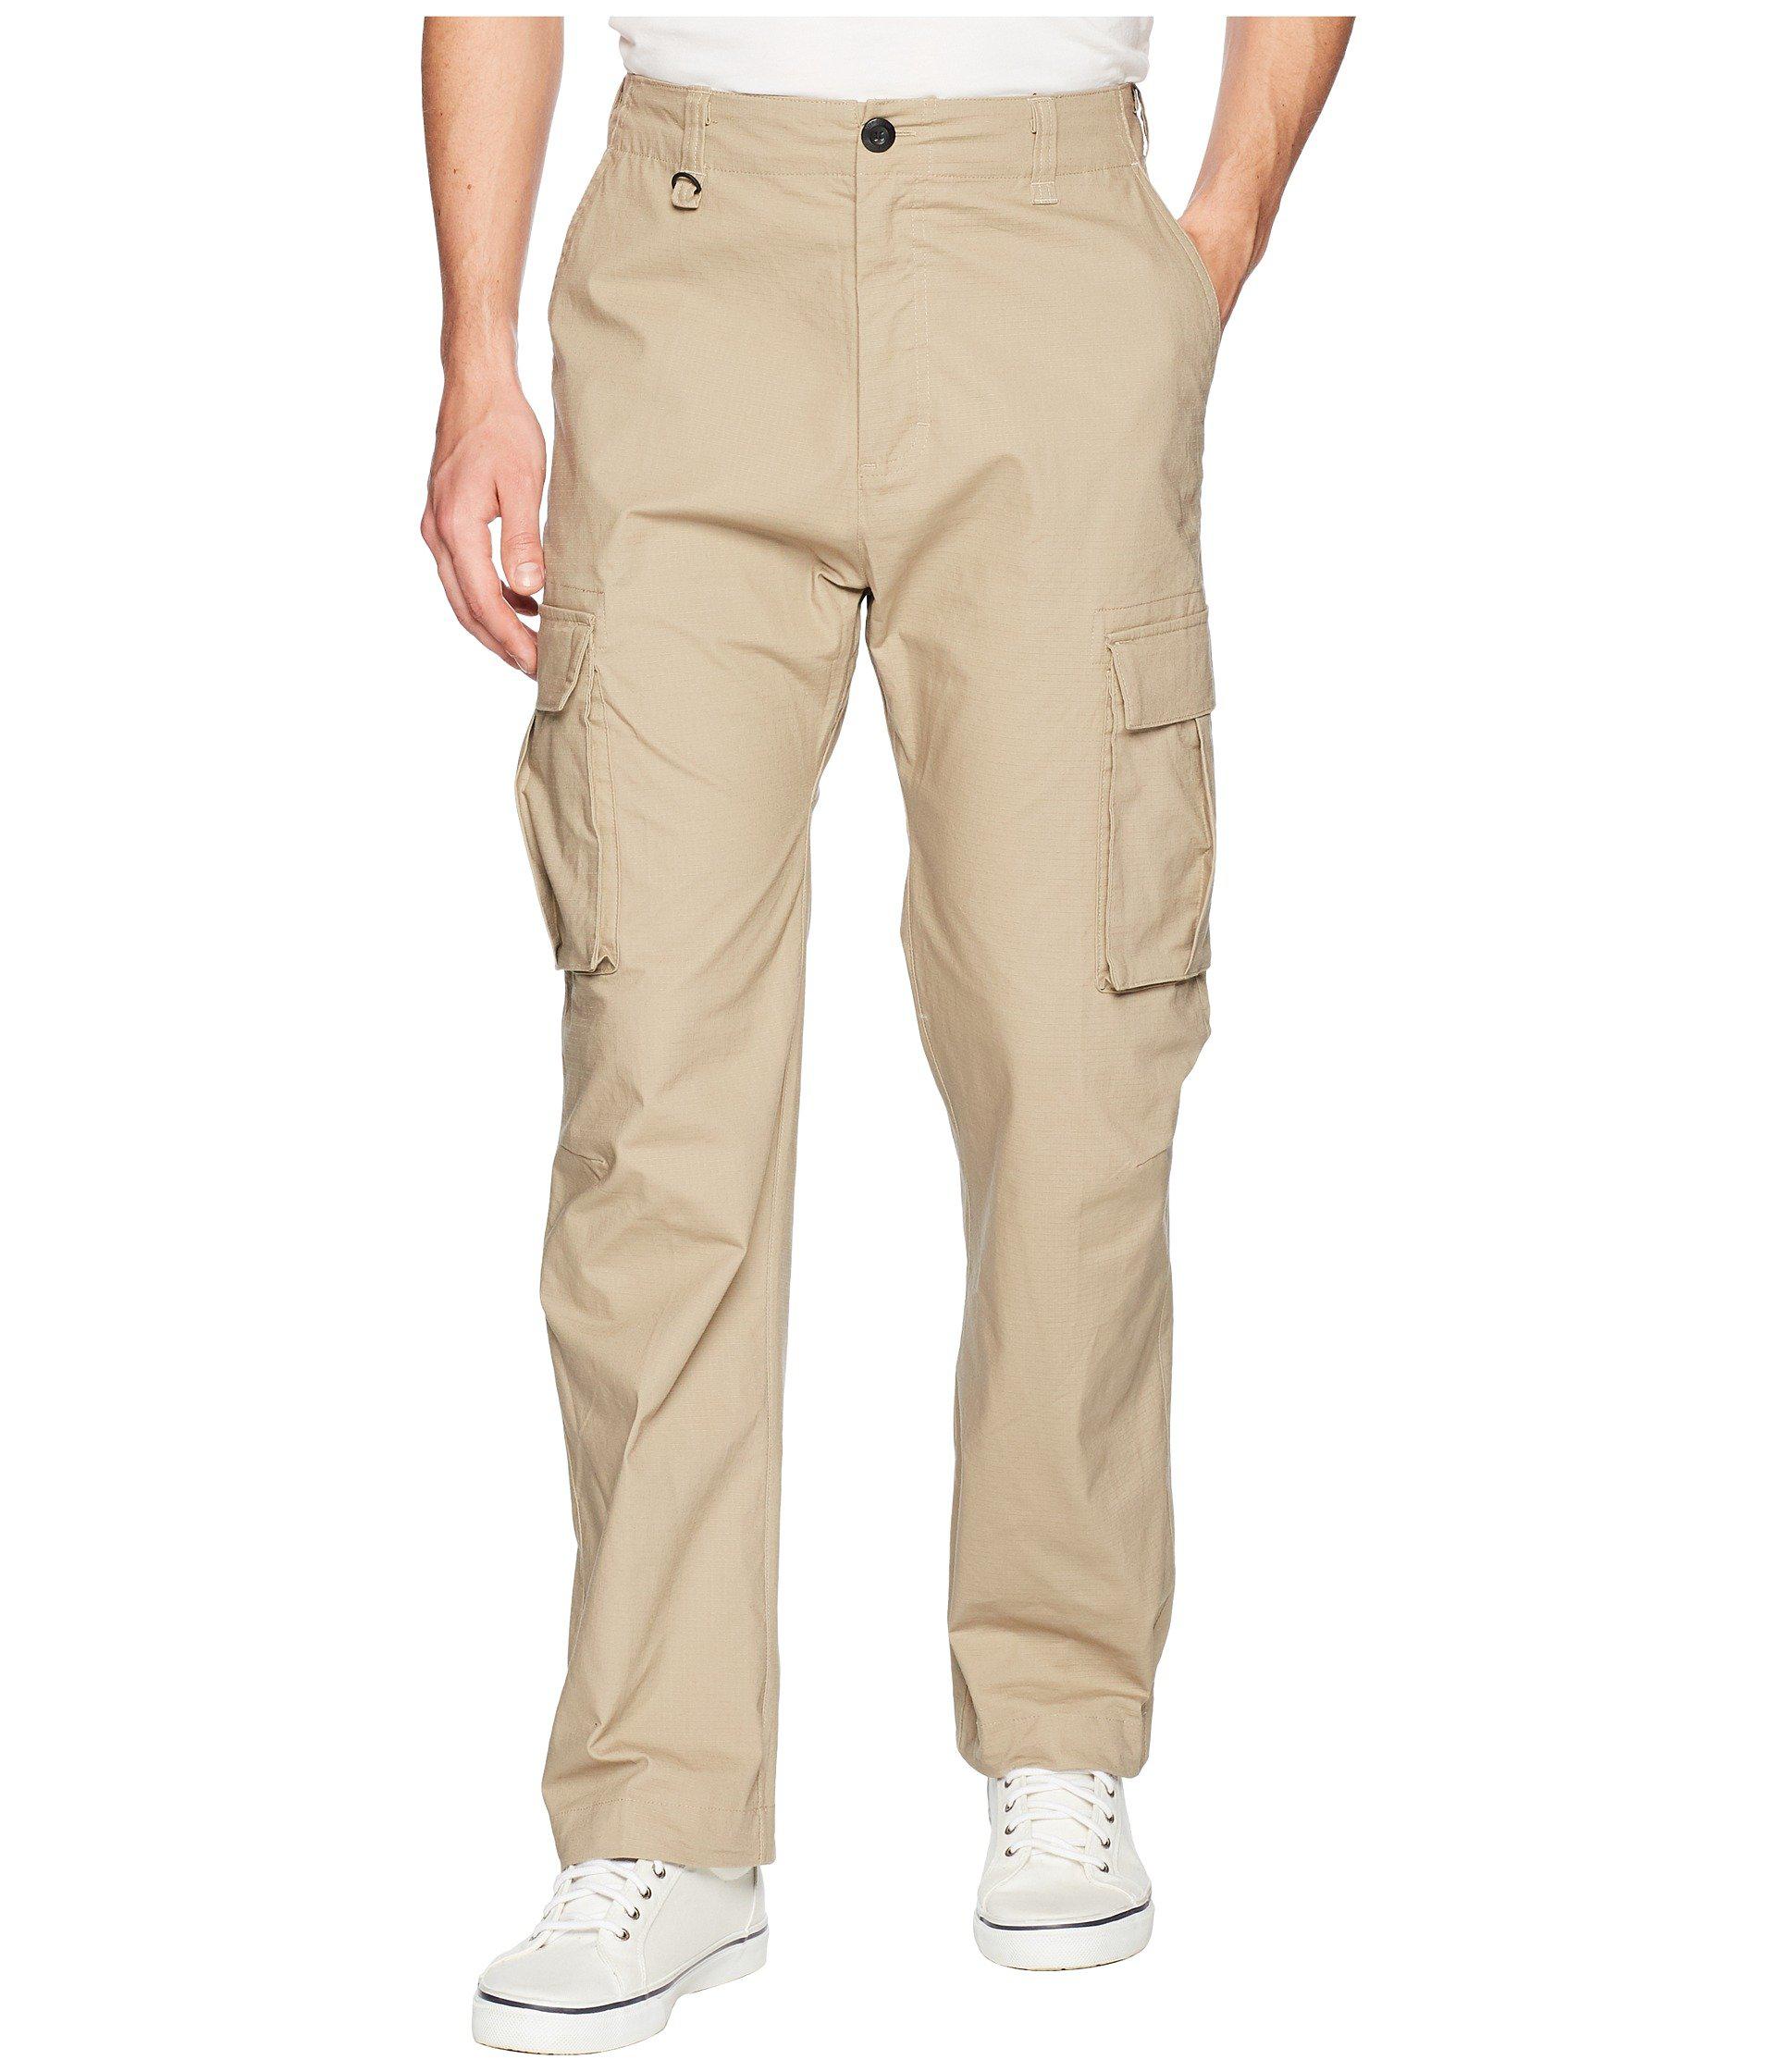 Nike Sb Flex Pants Fit To Move Cargo in Natural Men | Lyst